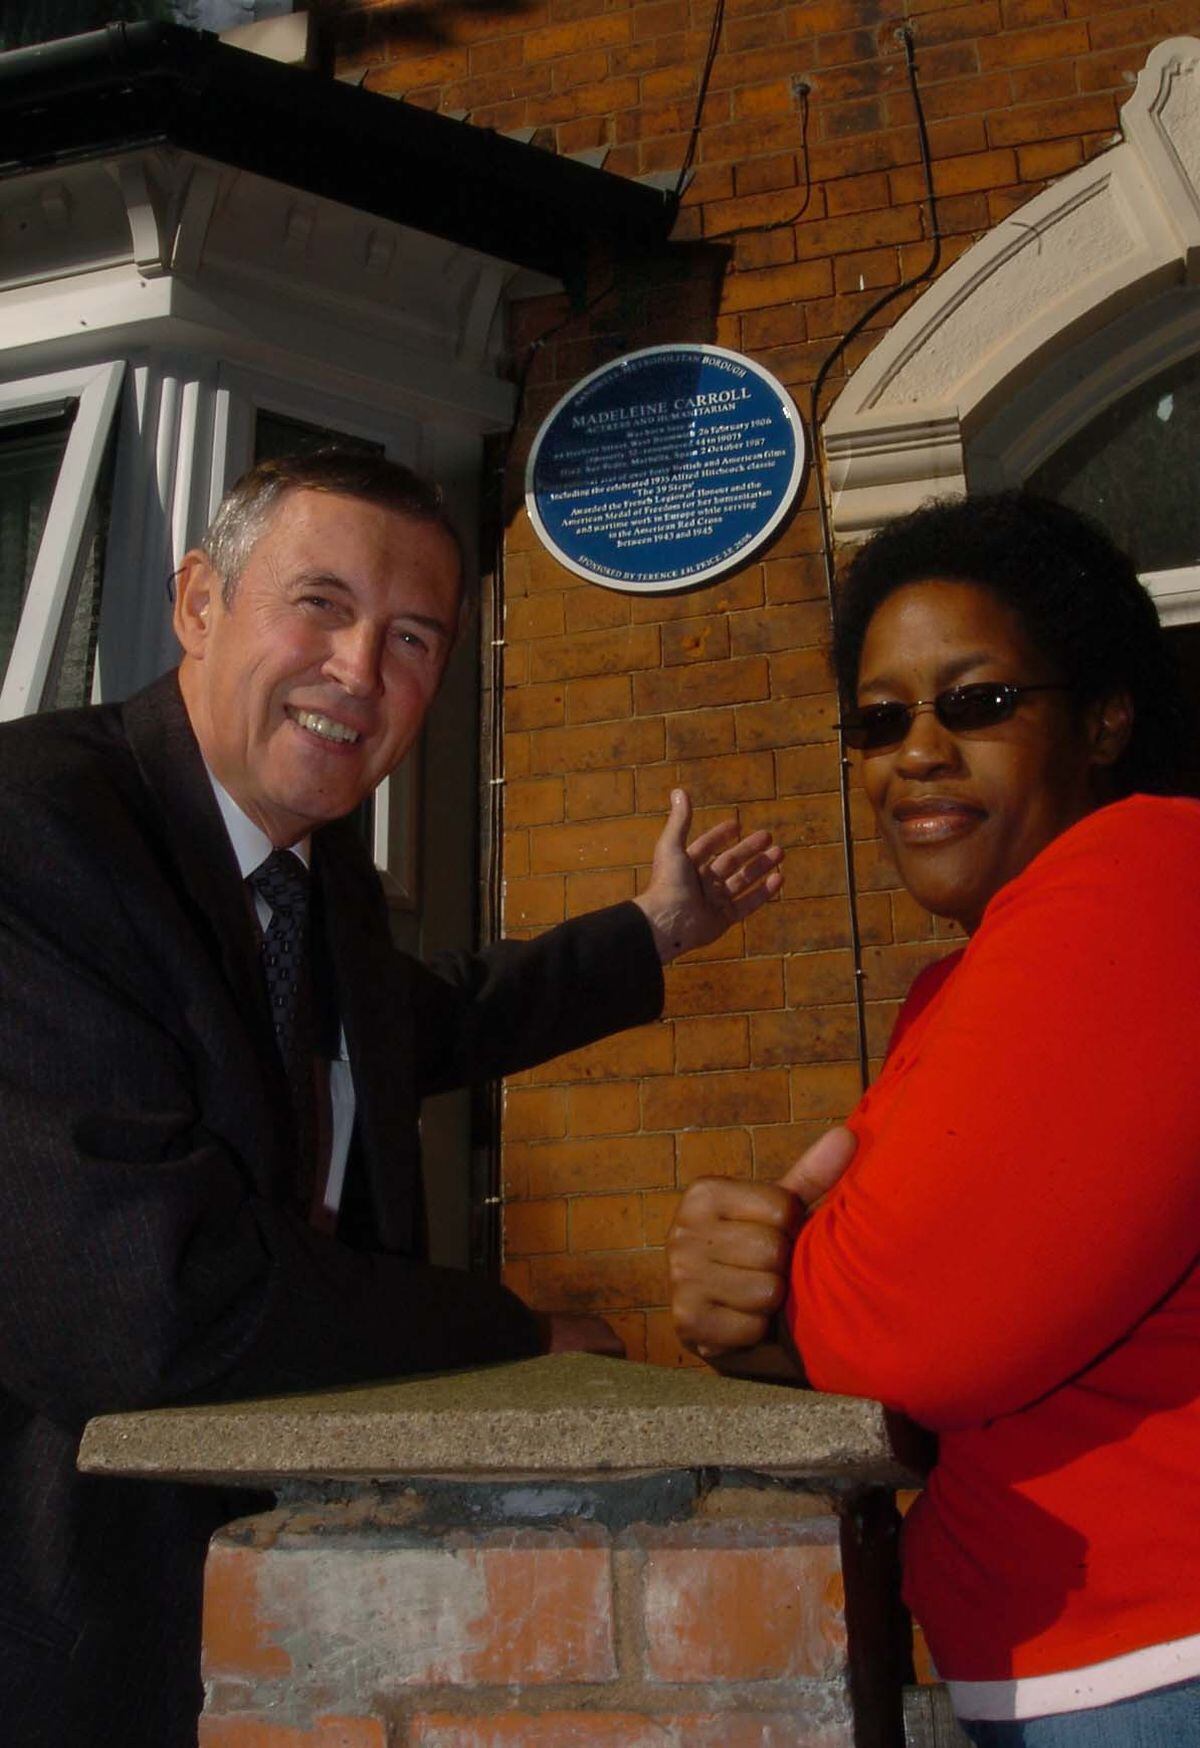 Historian Terry Price arranged for a blue plaque to be installed at Madeleine's birthplace in Herbert Street, West Bromwich in 2006. He was pictured with Mary McGlashen who was living at the house in the time.